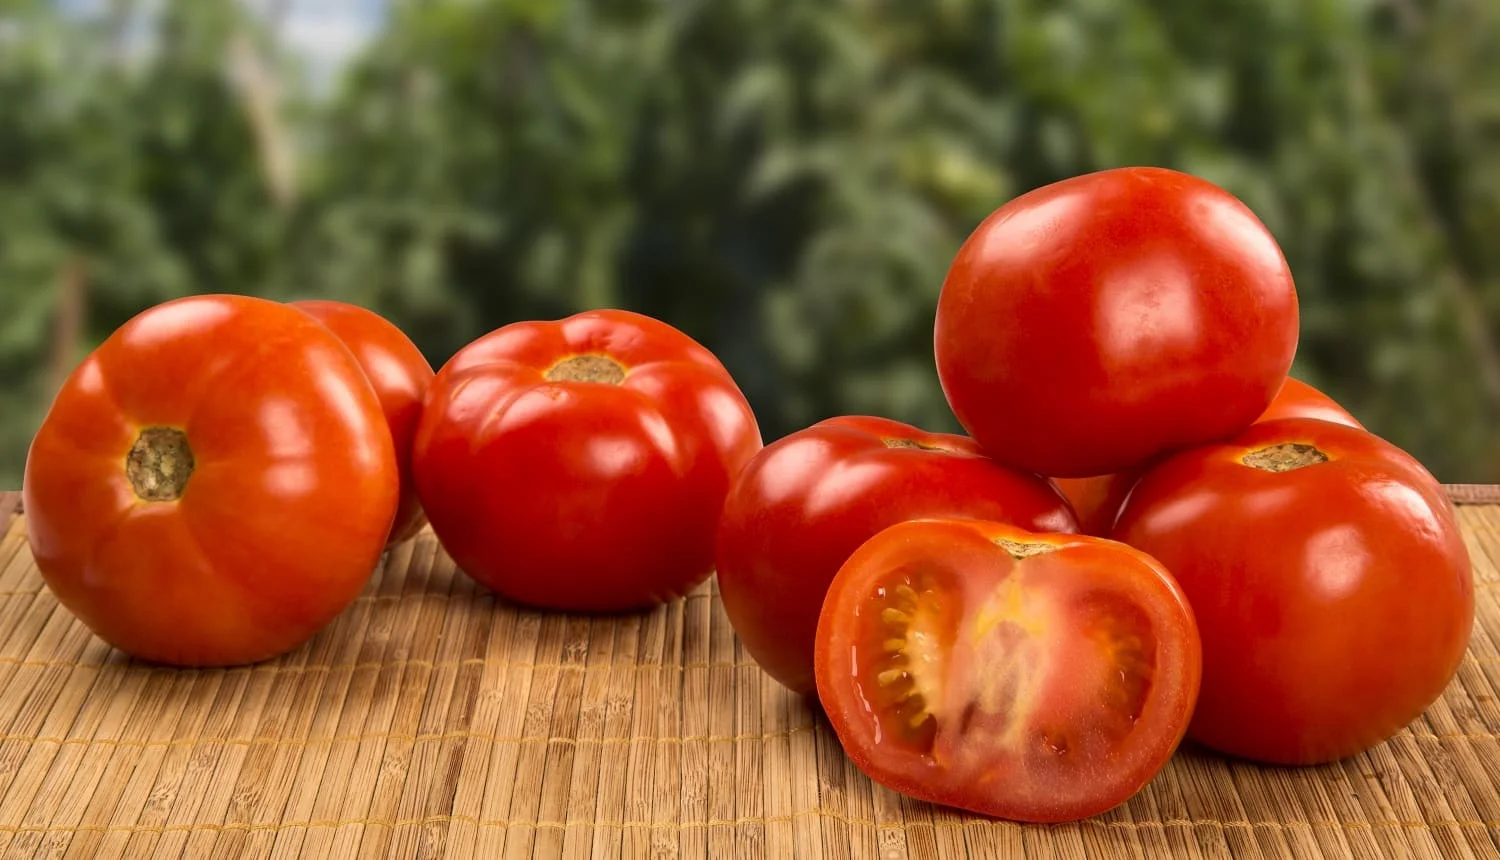 Some tomatoes over a wooden background. Fresh vegetable.